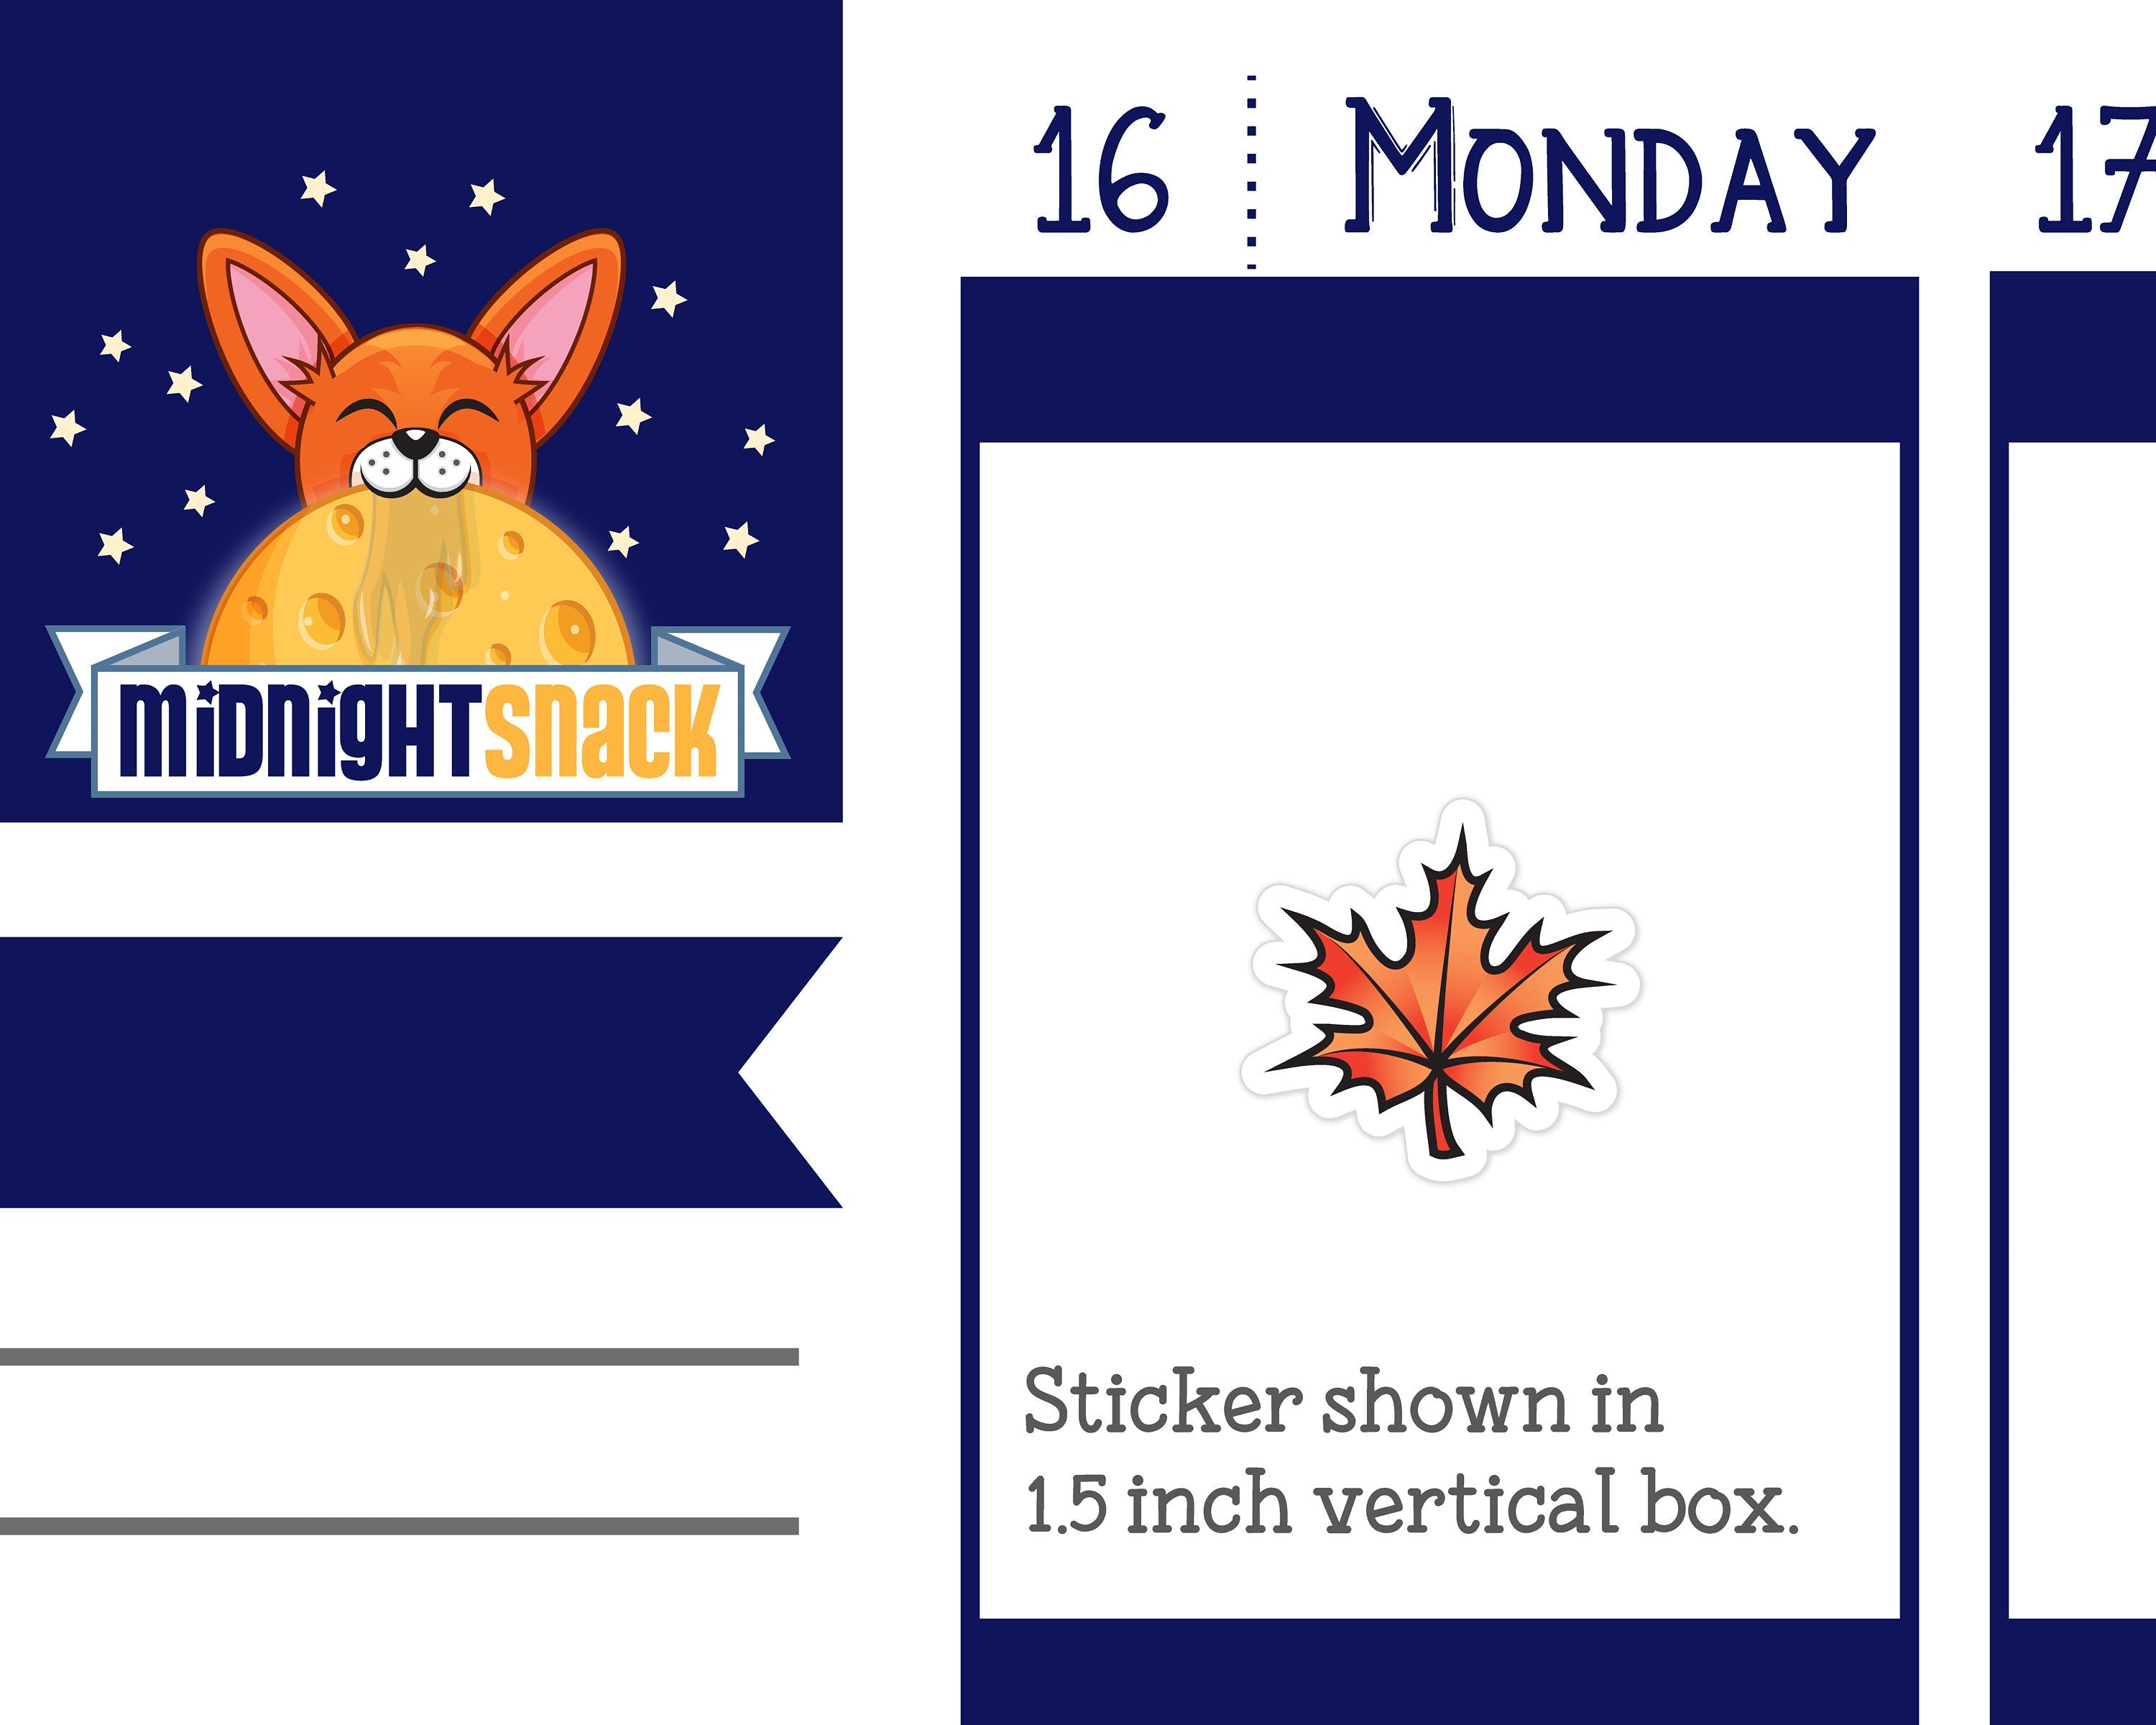 Maple Leaf Icon: Fall Weather Planner Stickers Midnight Snack Planner